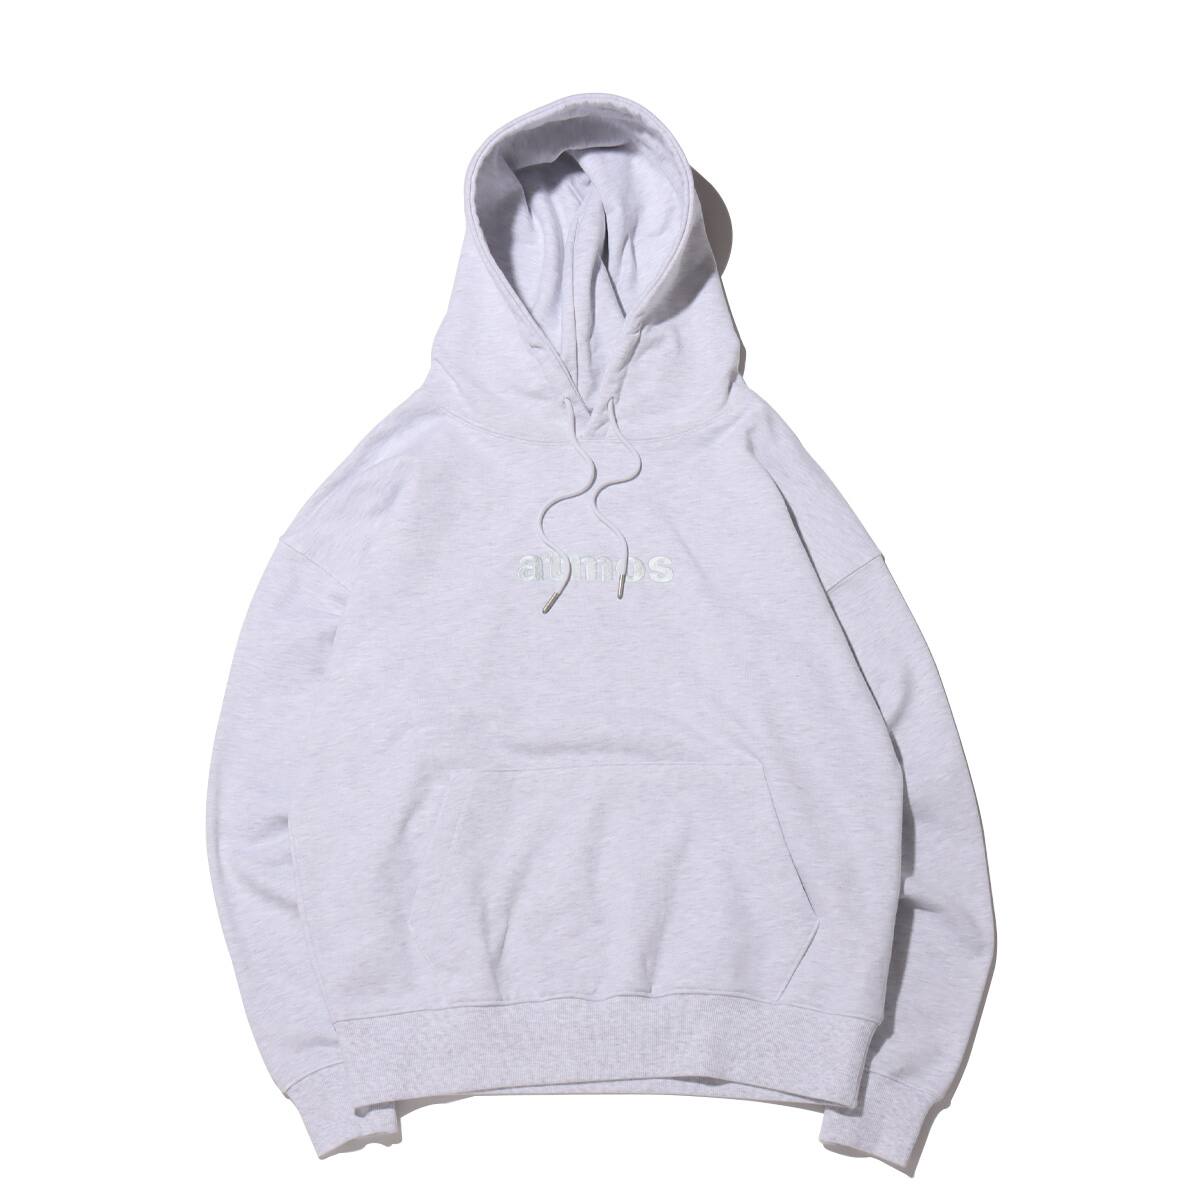 atmos EMBROIDERY LOGO HOODIE GRAY